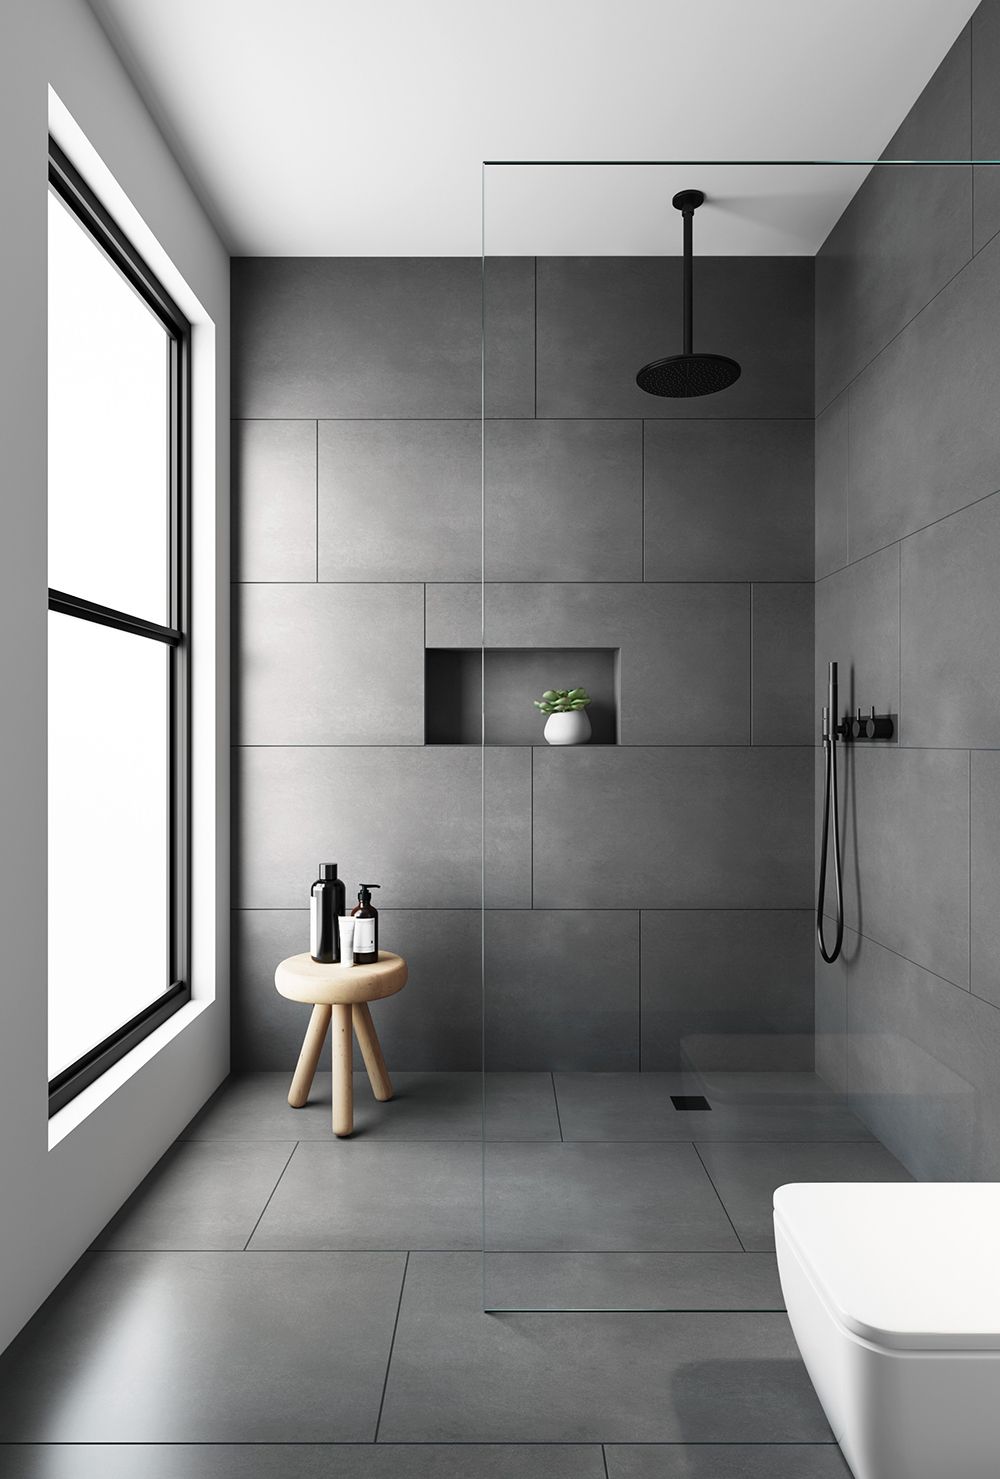 Choosing the right bathroom floor tile
for your space